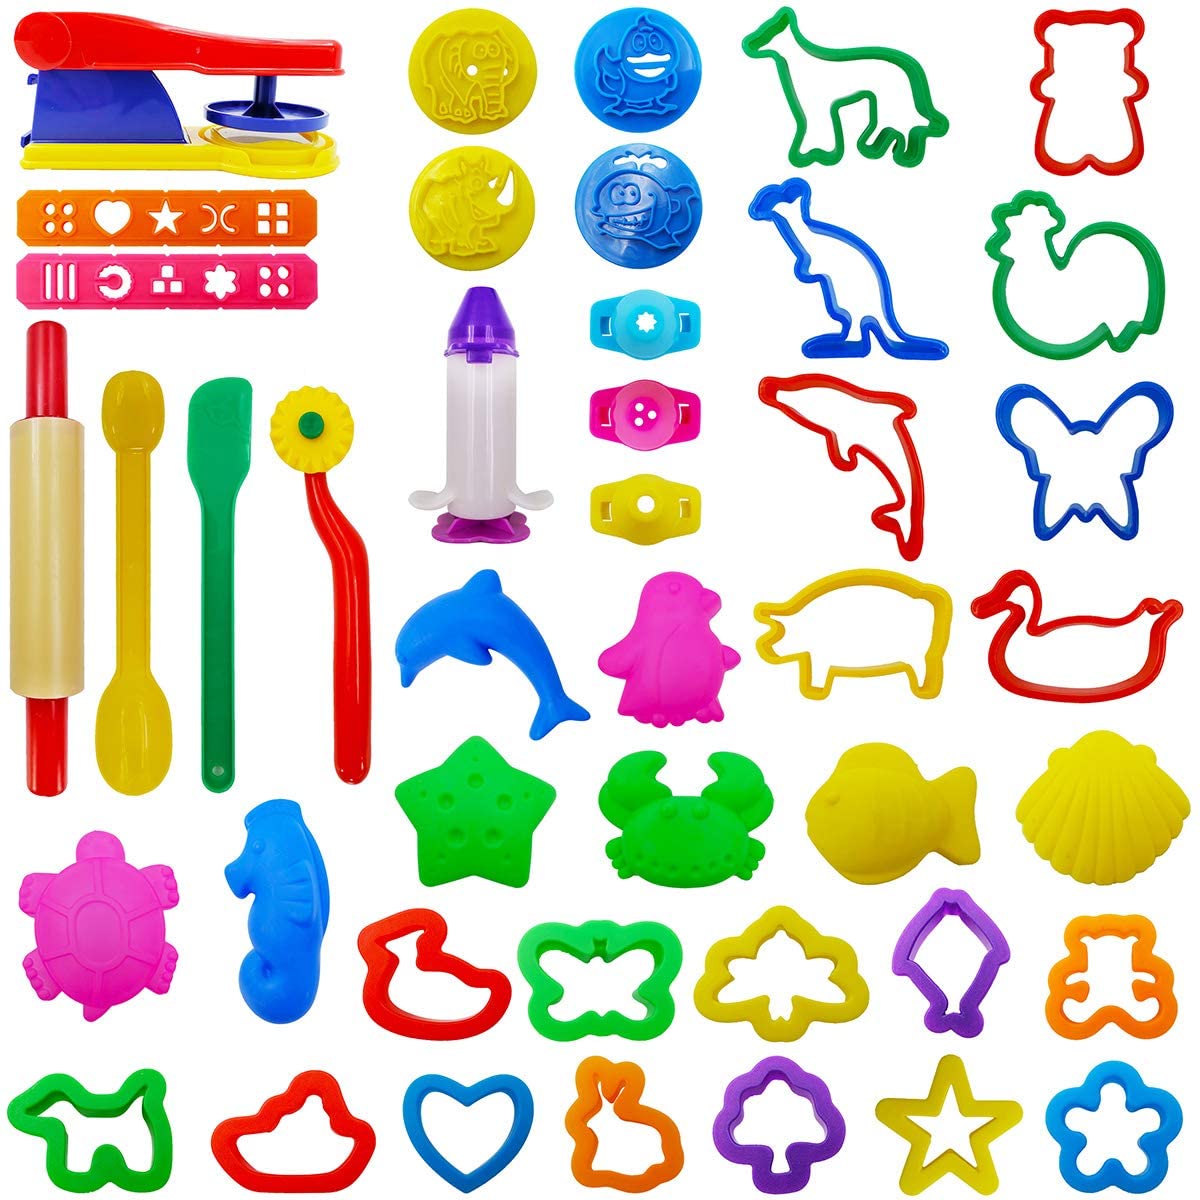 Random lot of Play-Doh molds, cutting shapes, Kinetic Sand accessories,  Etc…